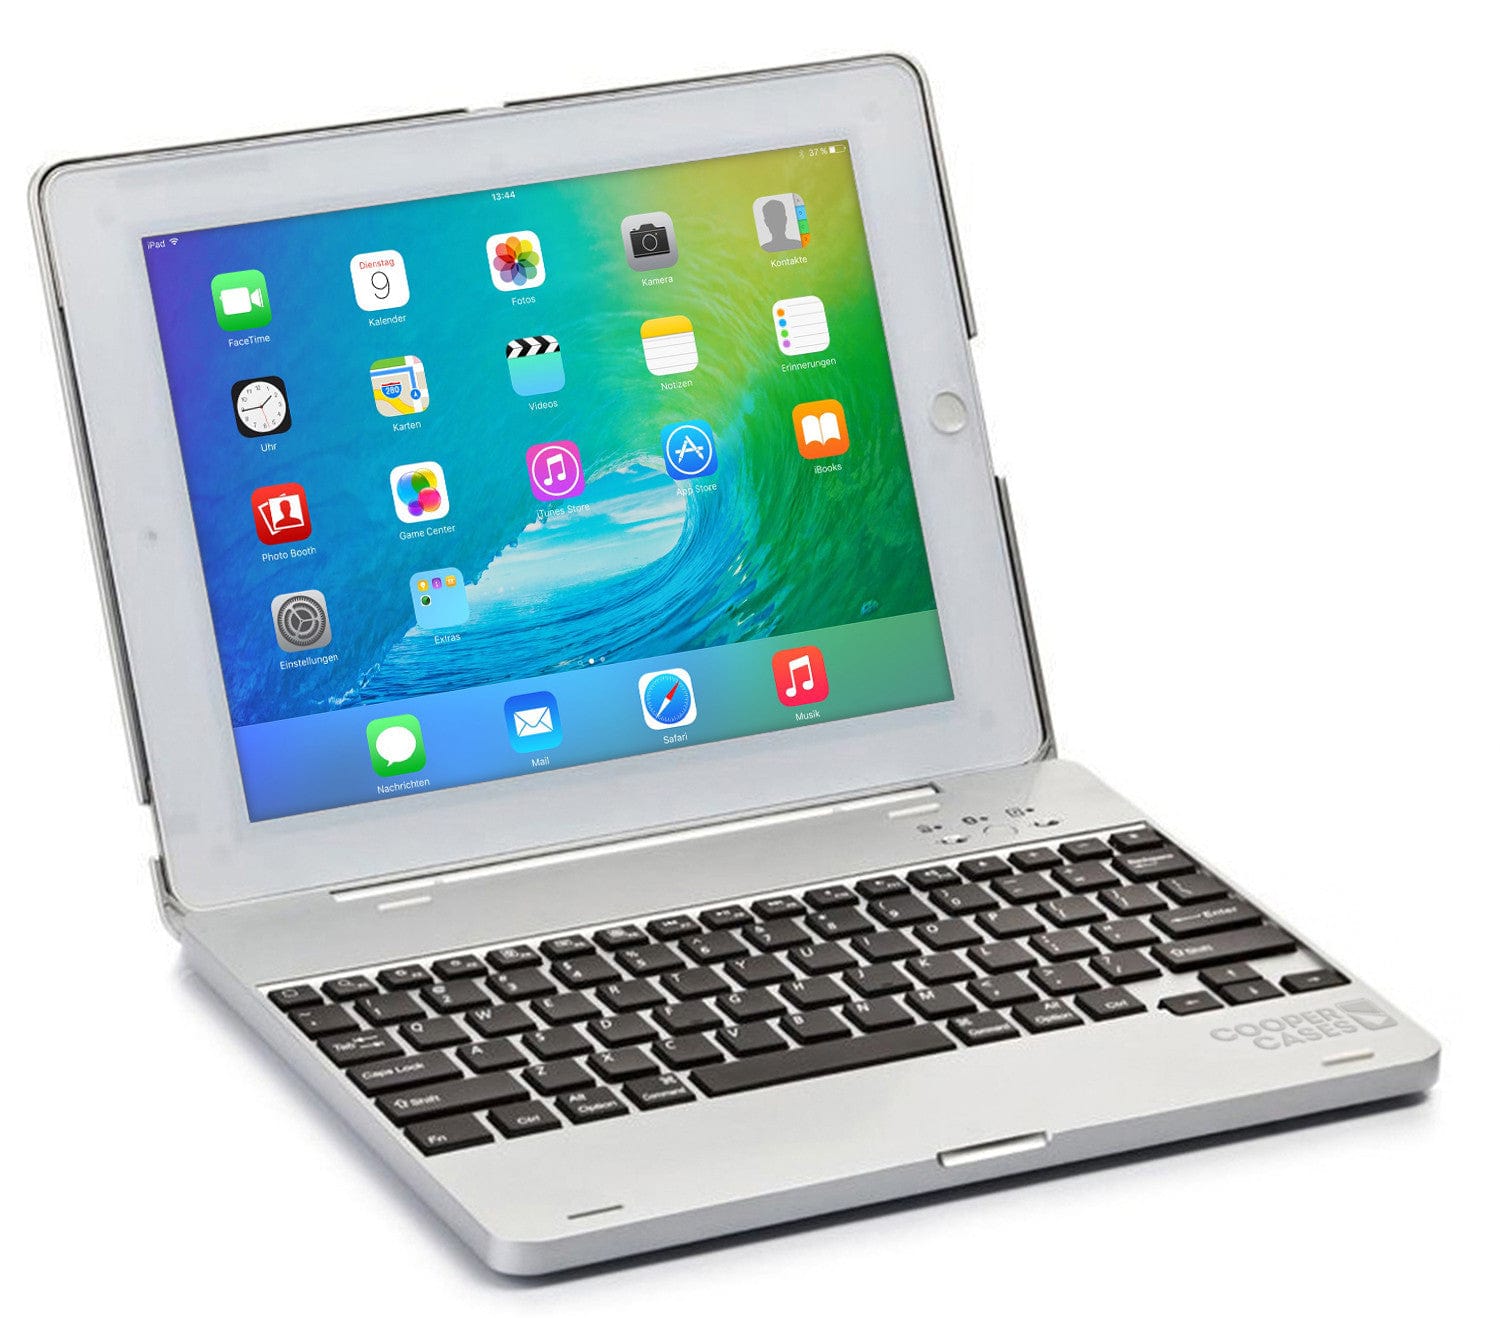 Cooper Kai Skel Keyboard Clamshell with built-in Power Bank for Apple iPad 2/3/4 - 1